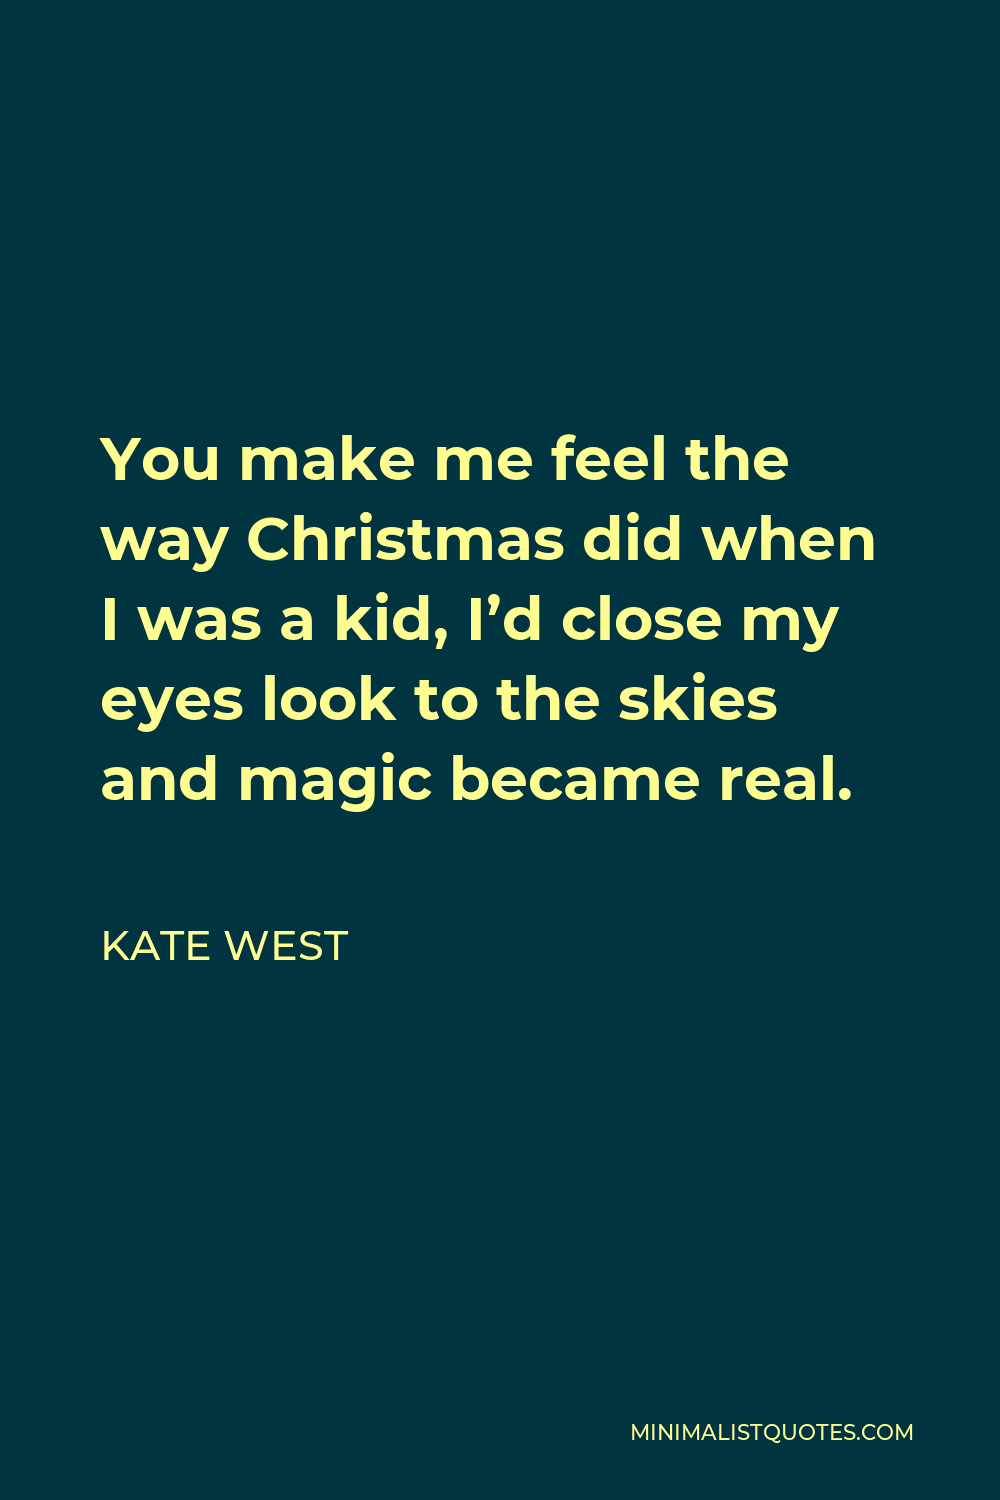 Kate West Quote - You make me feel the way Christmas did when I was a kid, I’d close my eyes look to the skies and magic became real.